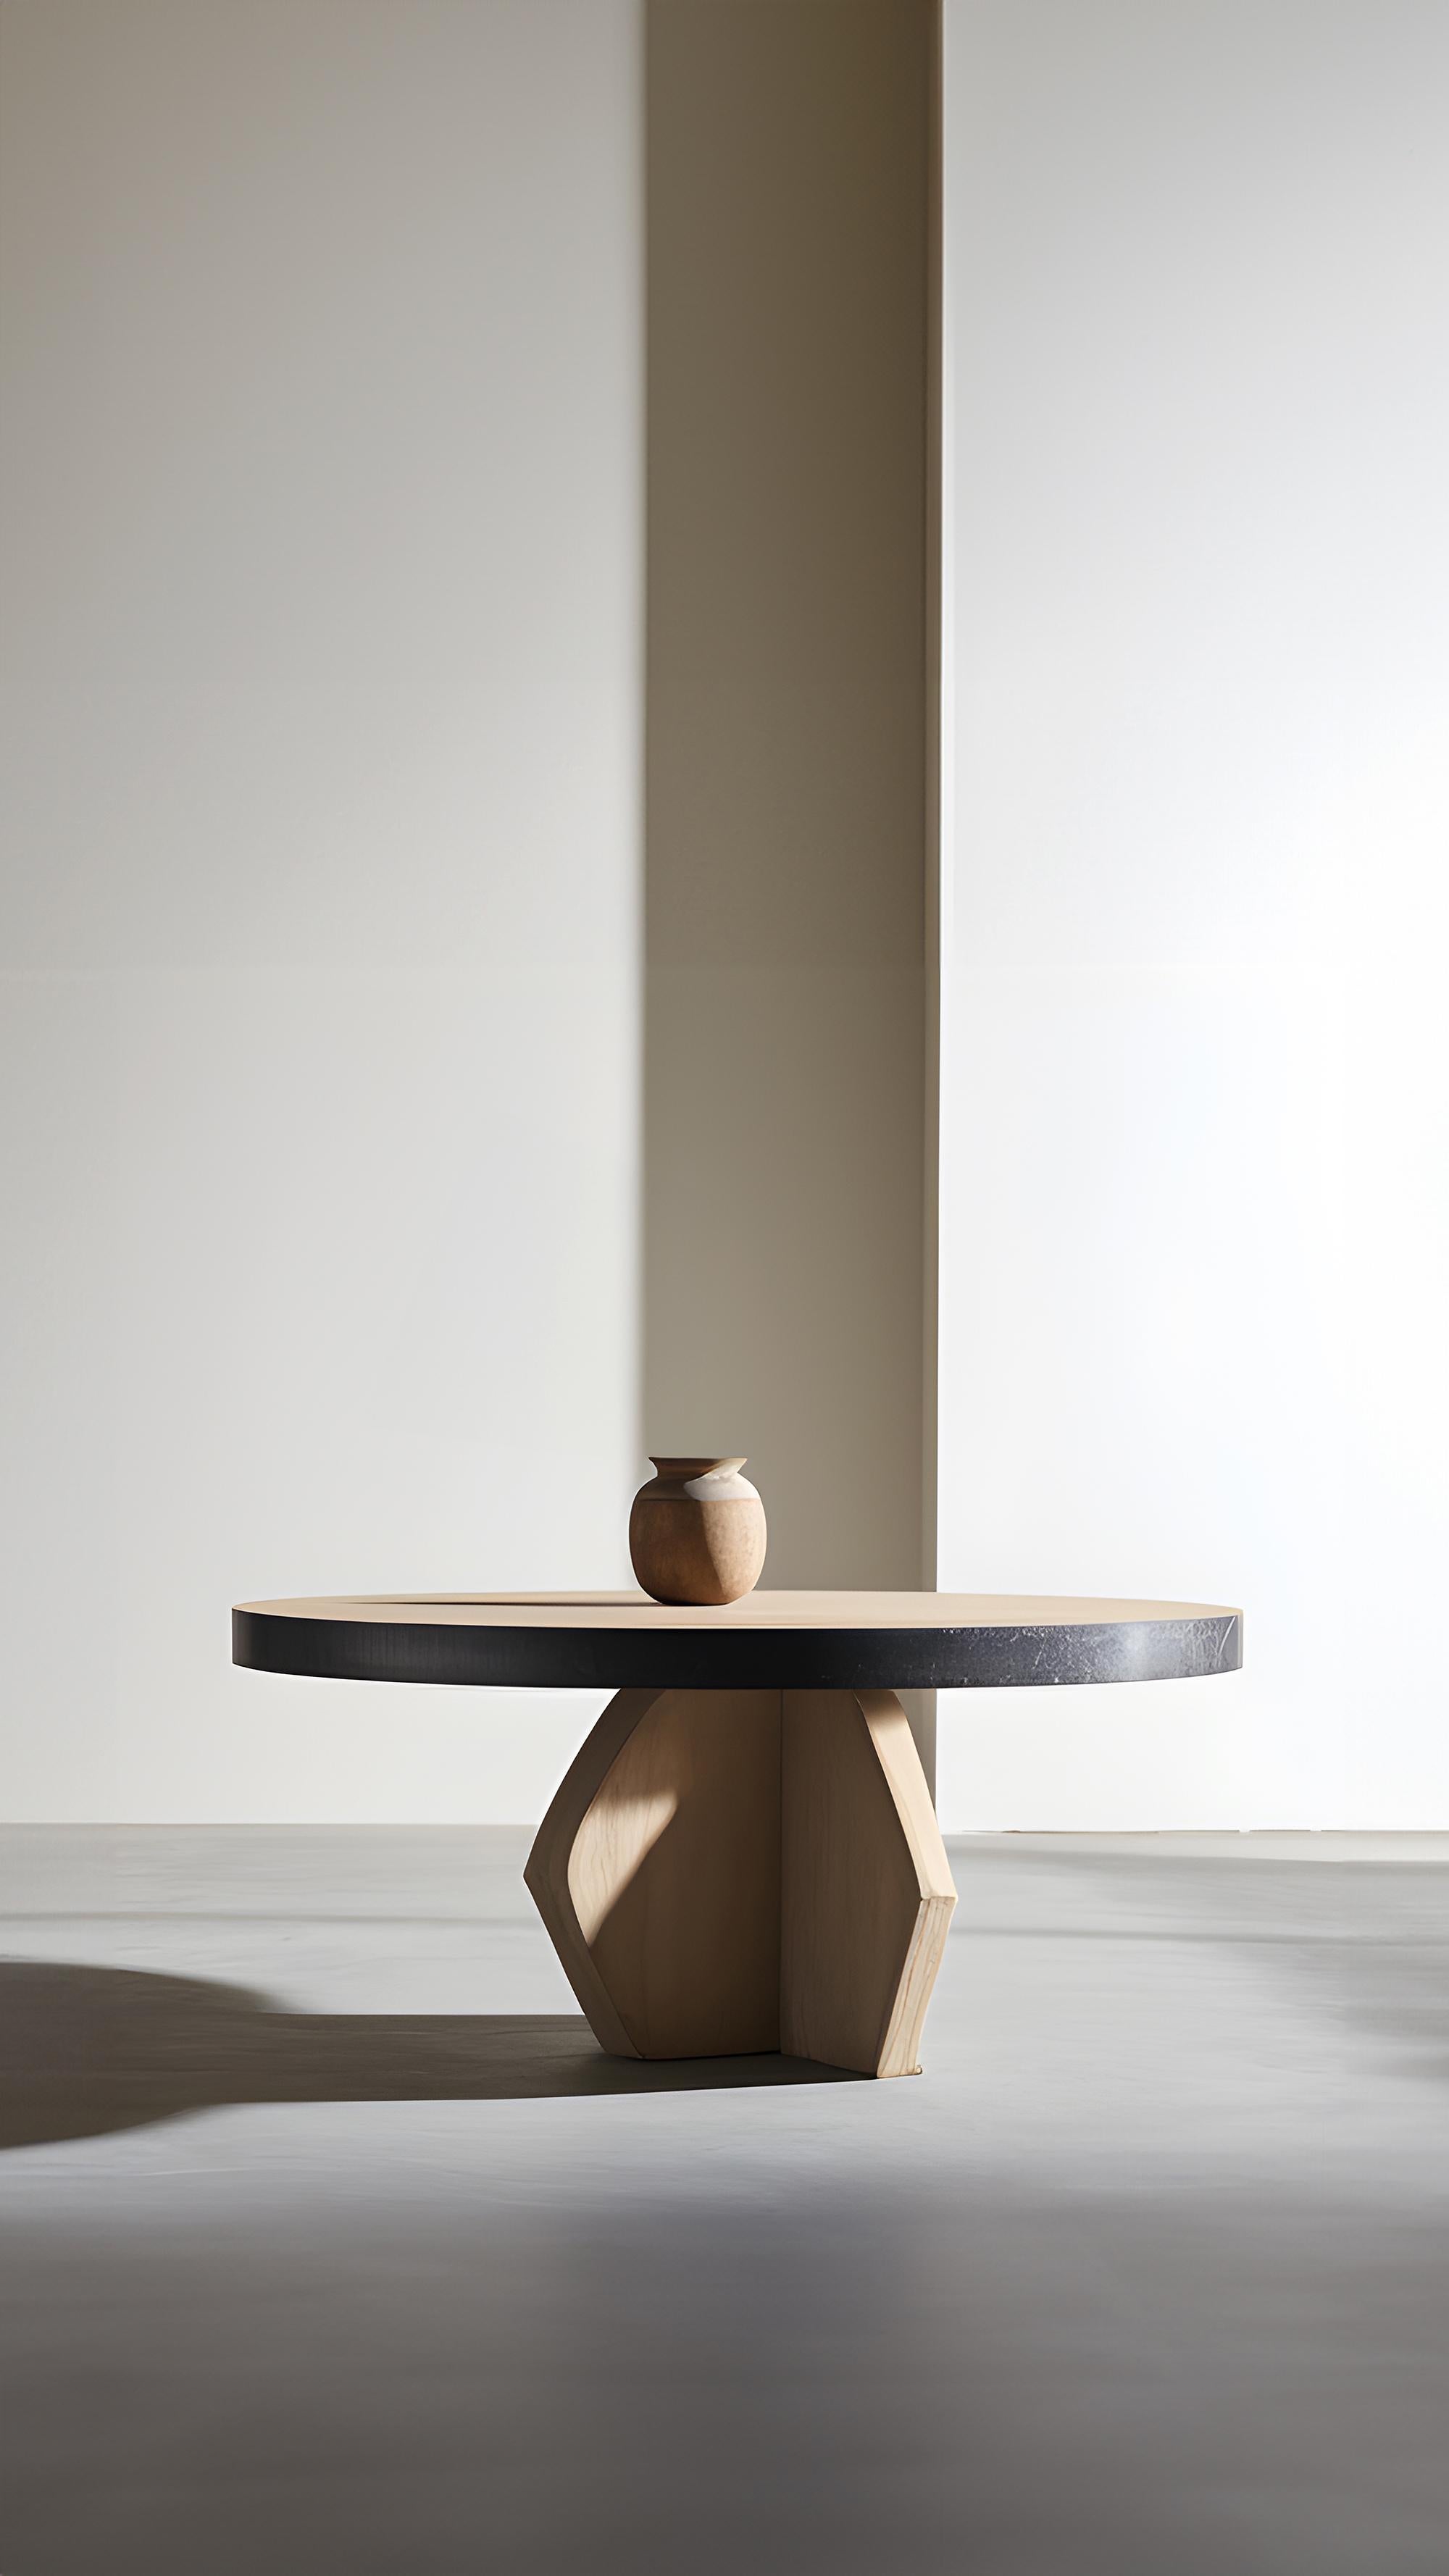 Hardwood Fundamenta Coffee Table 55 Solid Oak, Abstract Design by NONO For Sale